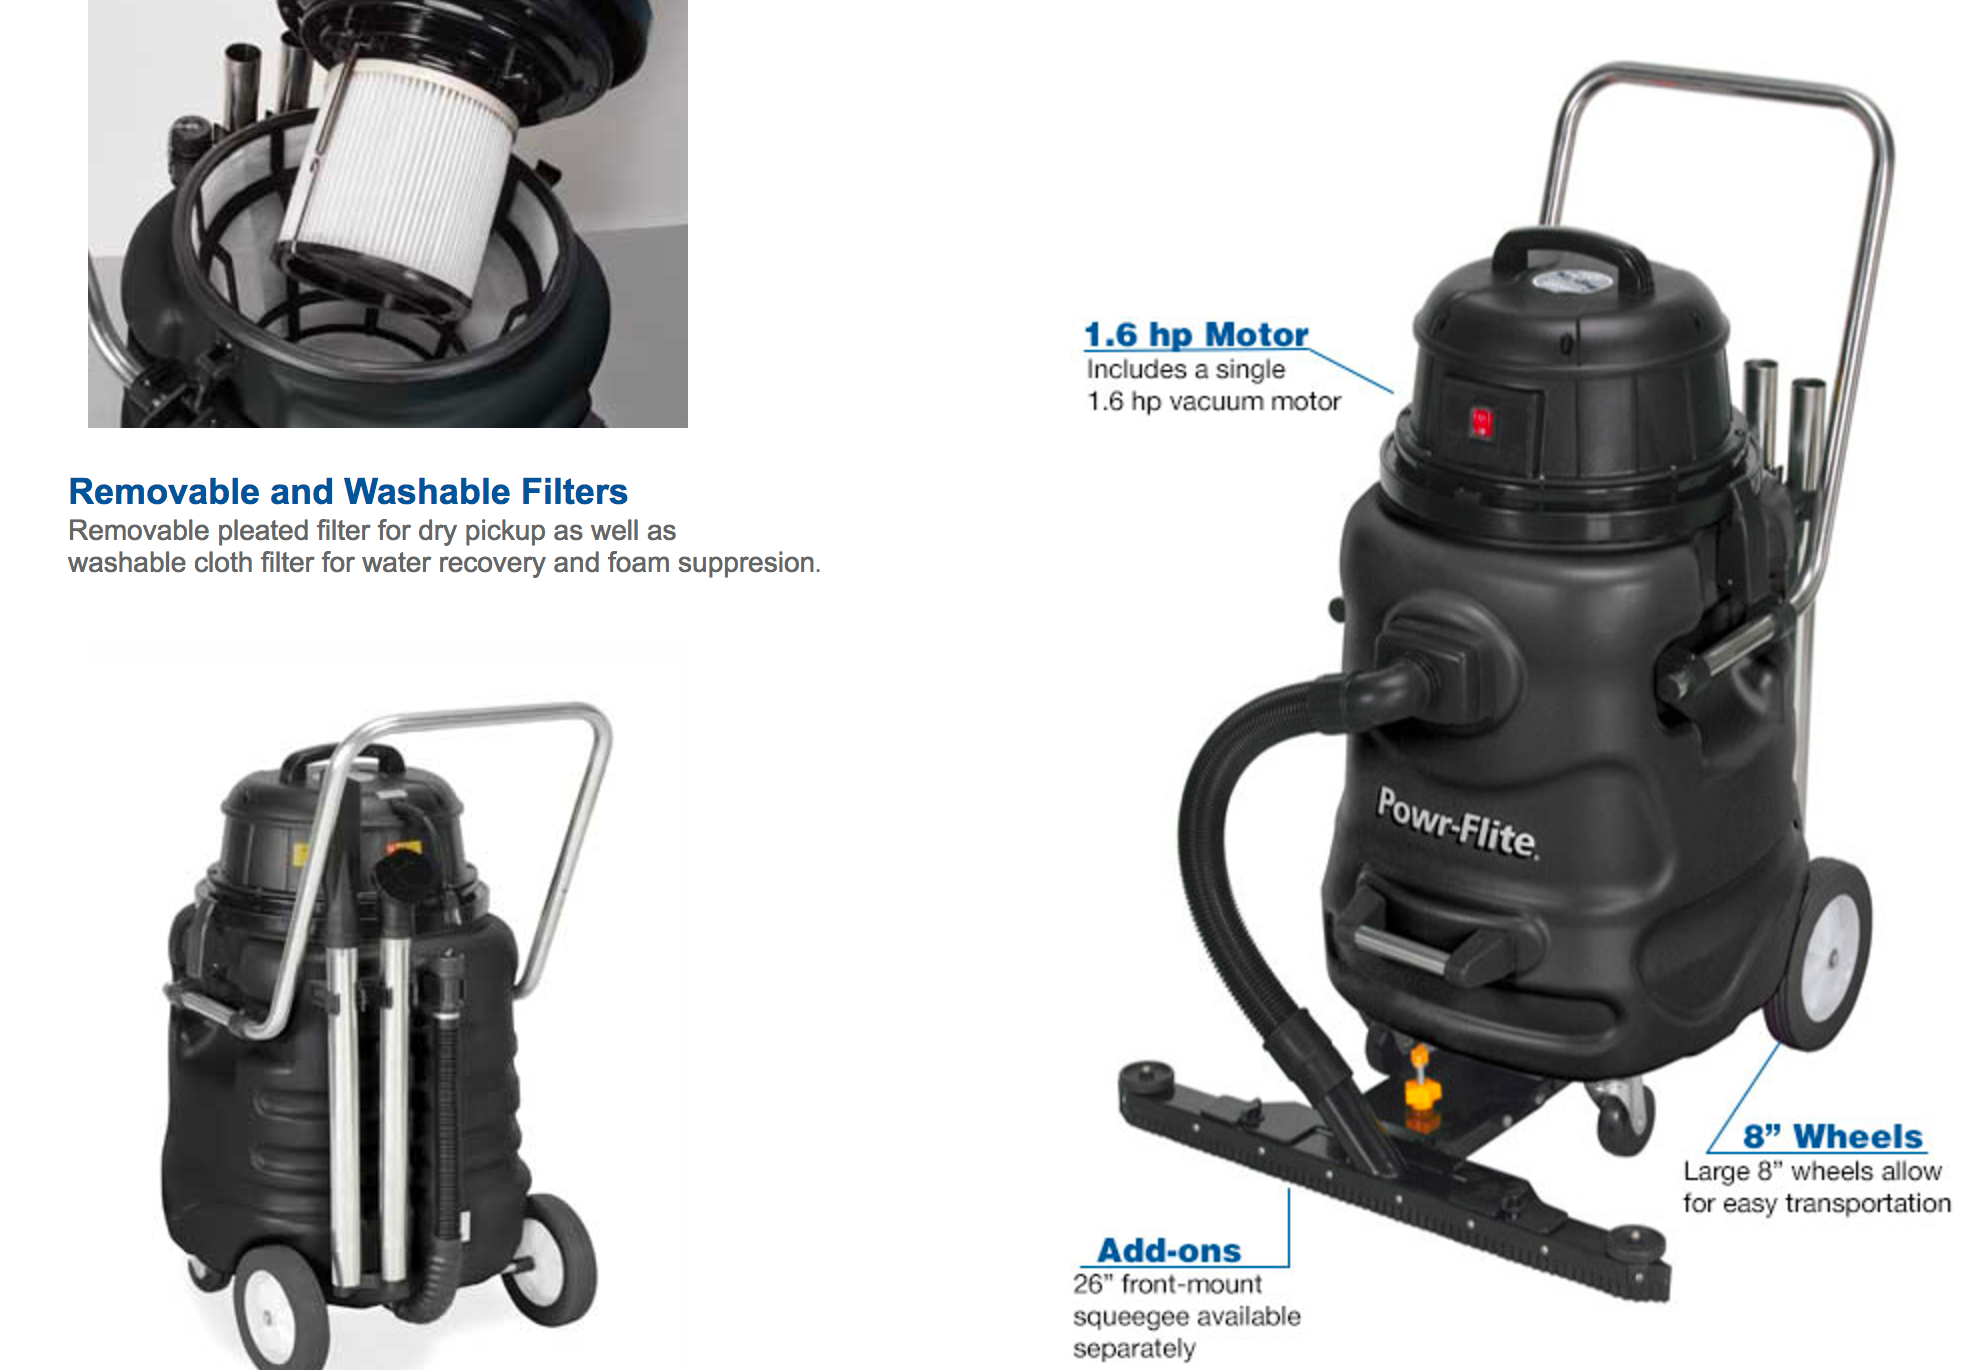 All Powr-Flite Wet/Dry vacuums have the capacity and power for large water recovery jobs or dry debris pick-up in the shop or on the job site. They are perfect for hard floor maintenance jobs, recovering floor strippers and hard floor cleaners easily. 